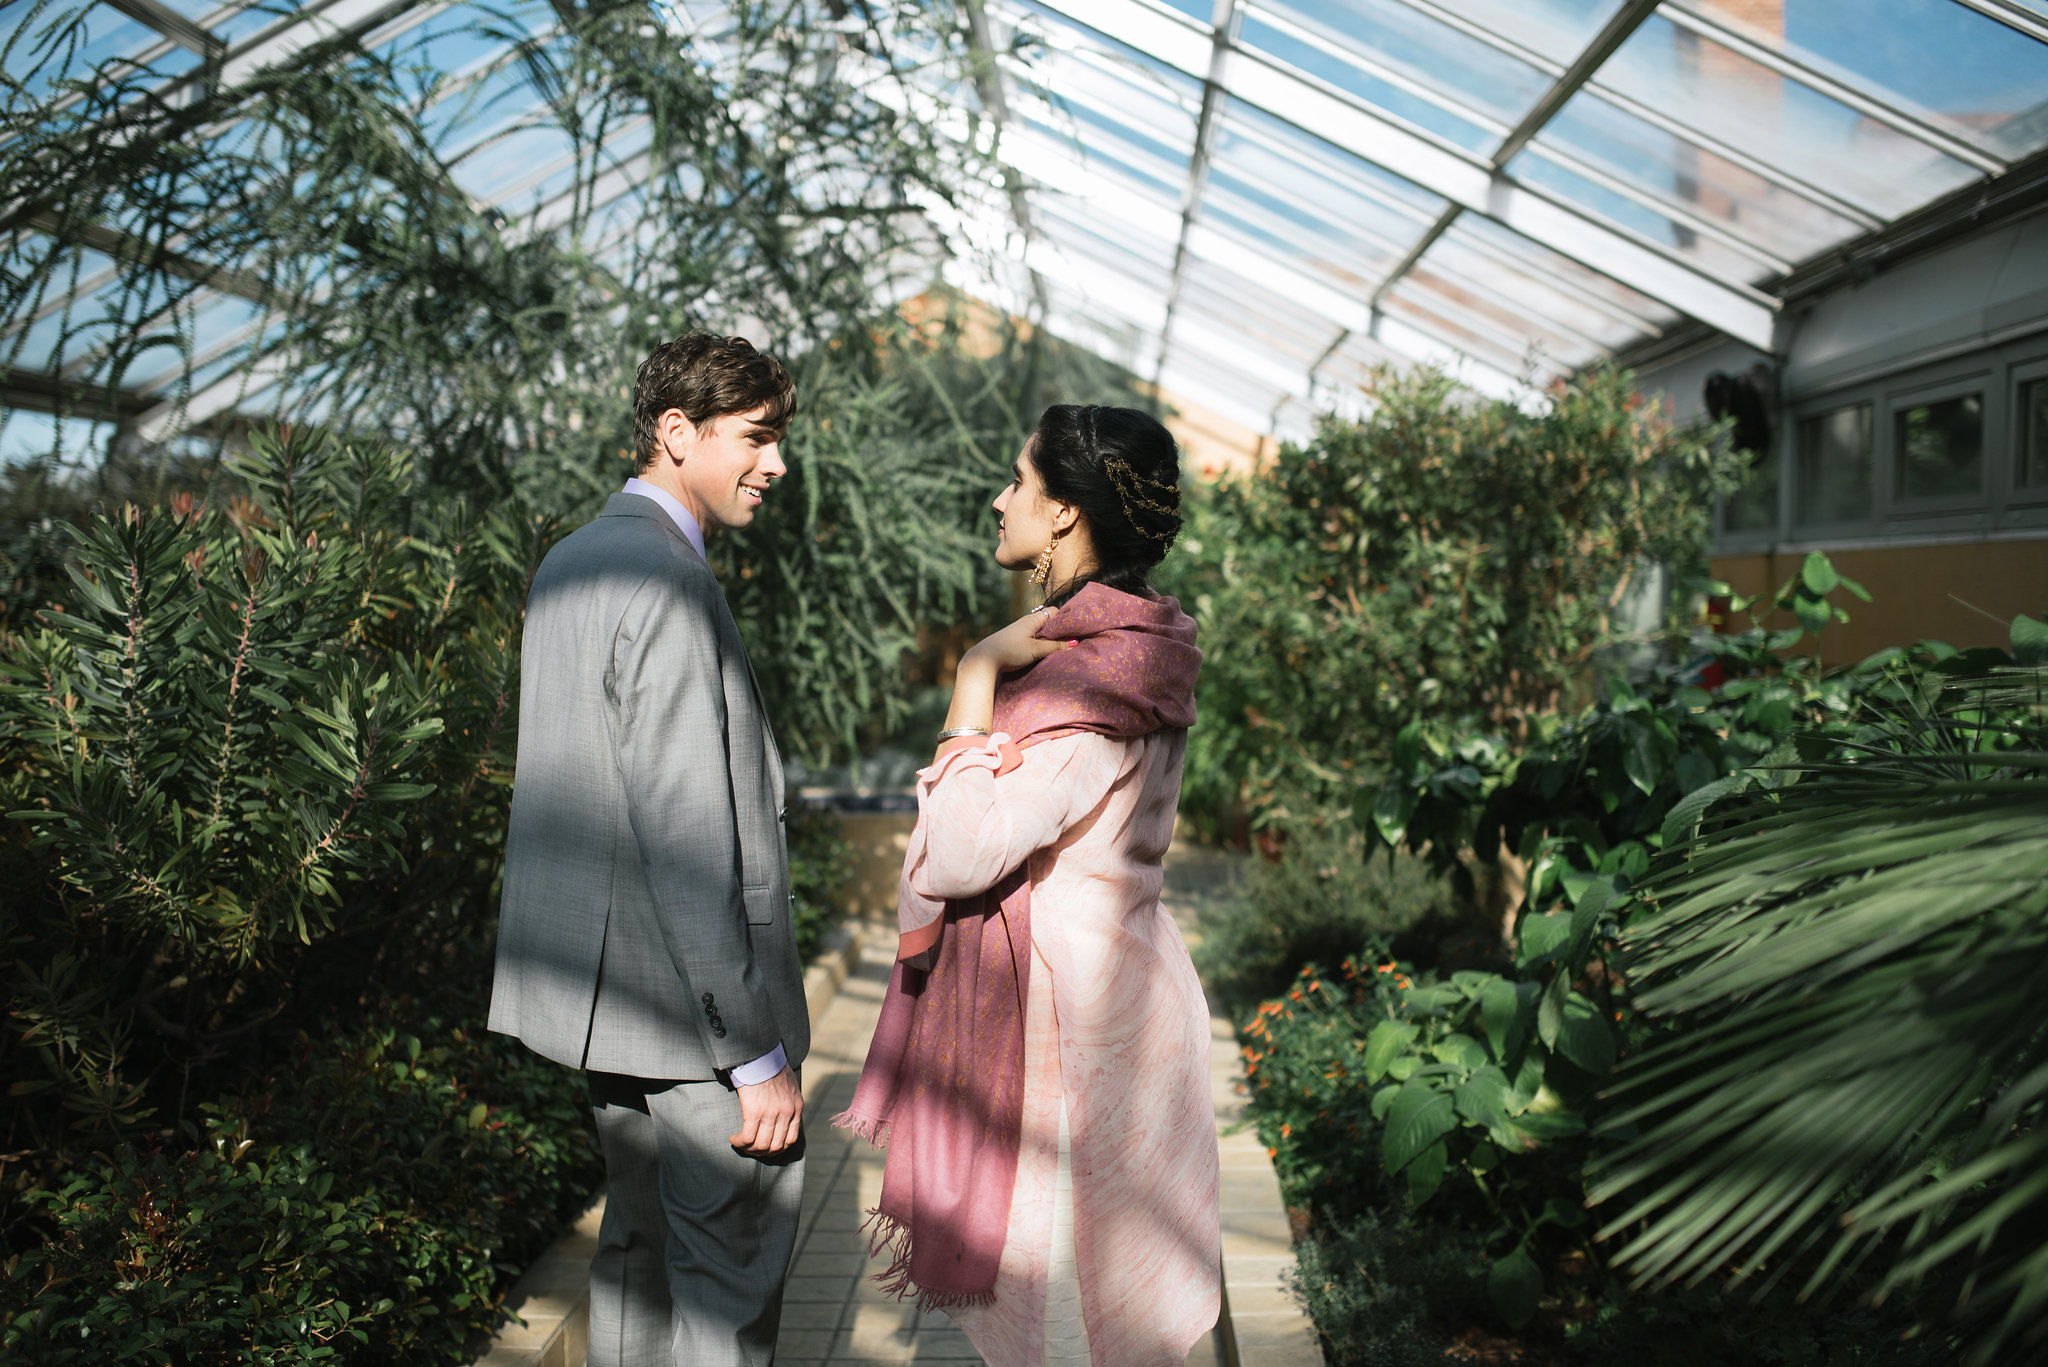 Elopement, Weekday Wedding, Towson, Rawlings Conservatory, Greenhouse, Baltimore Wedding Photographer, Indian American, Outdoor, Nature, Romantic, Garden, Bride and Groom